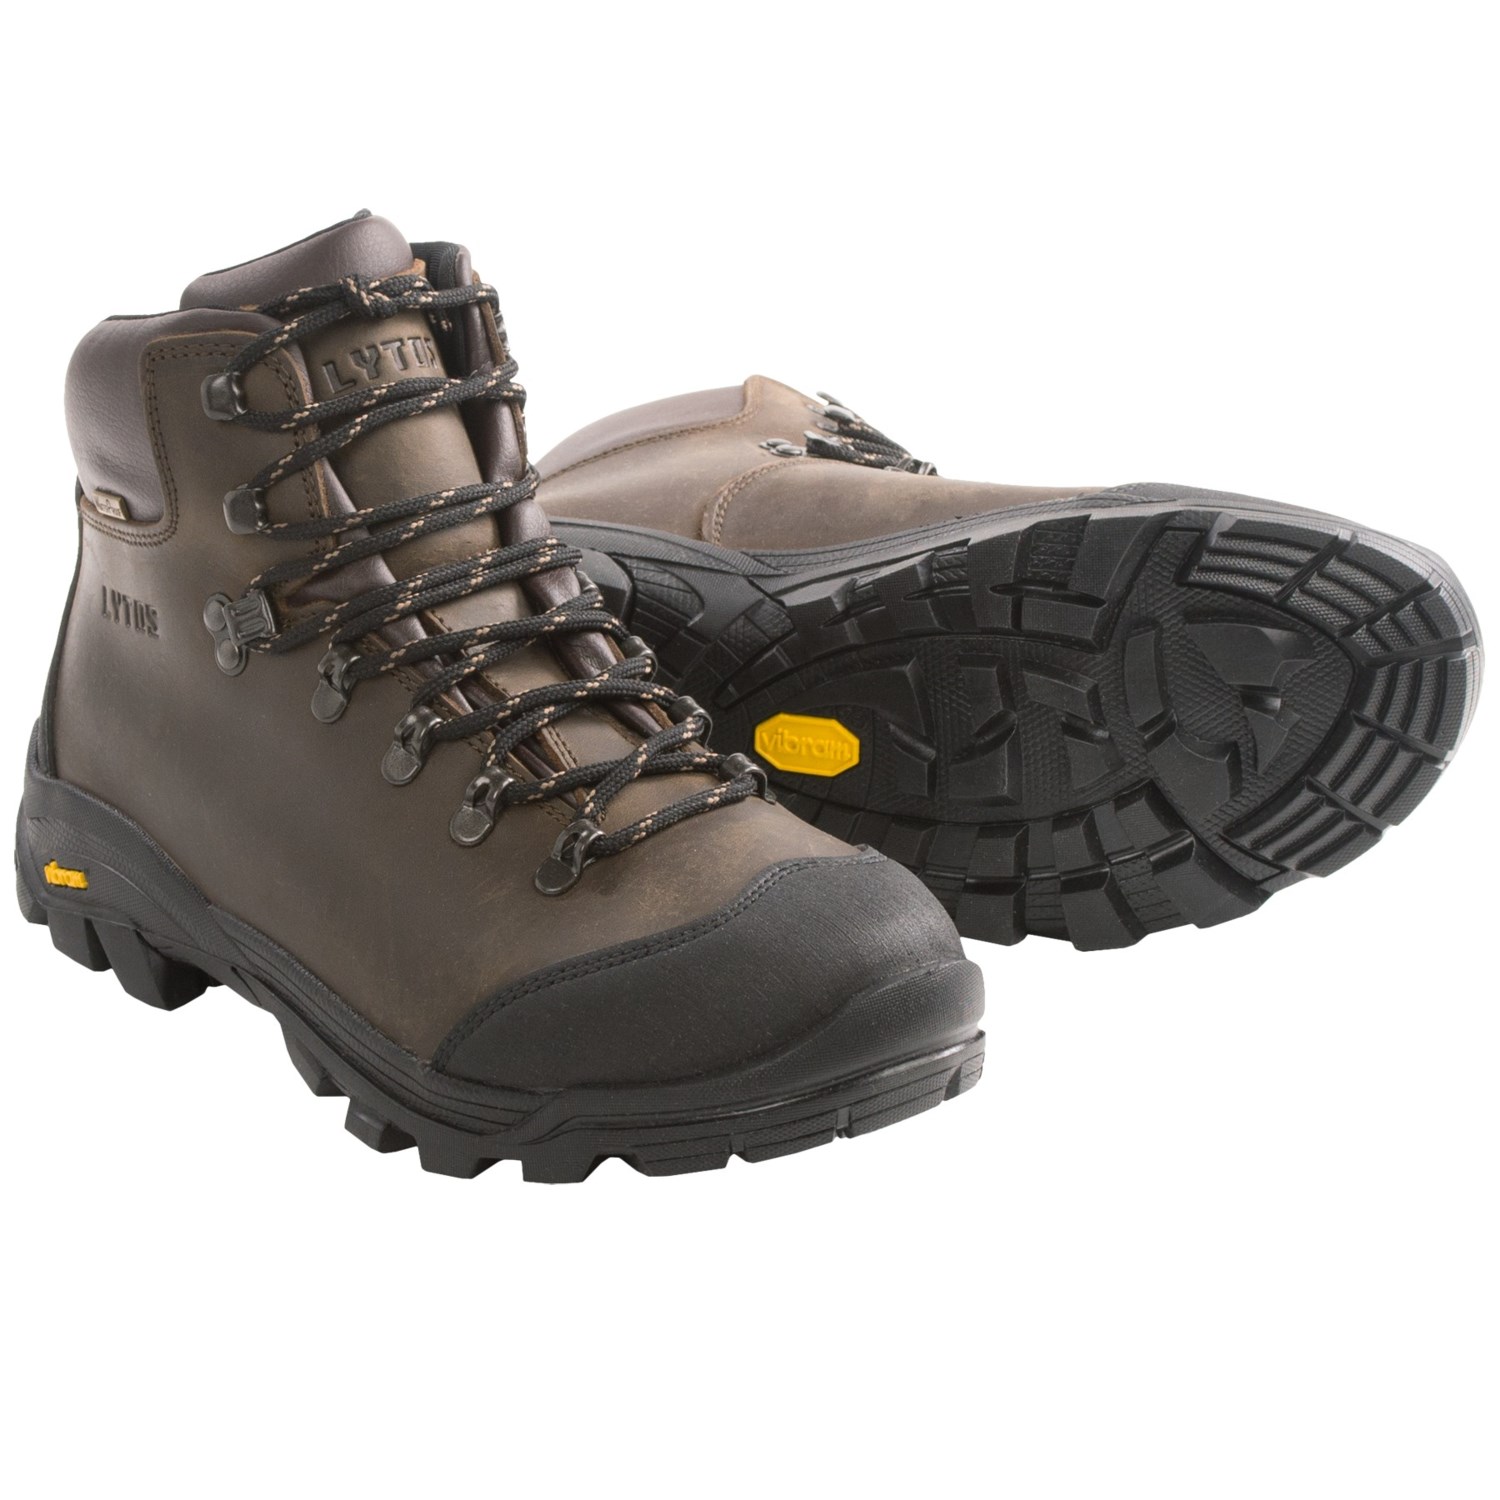 Lytos Hiker Midweight Hiking Boots (For Men) 7695X - Save 52%